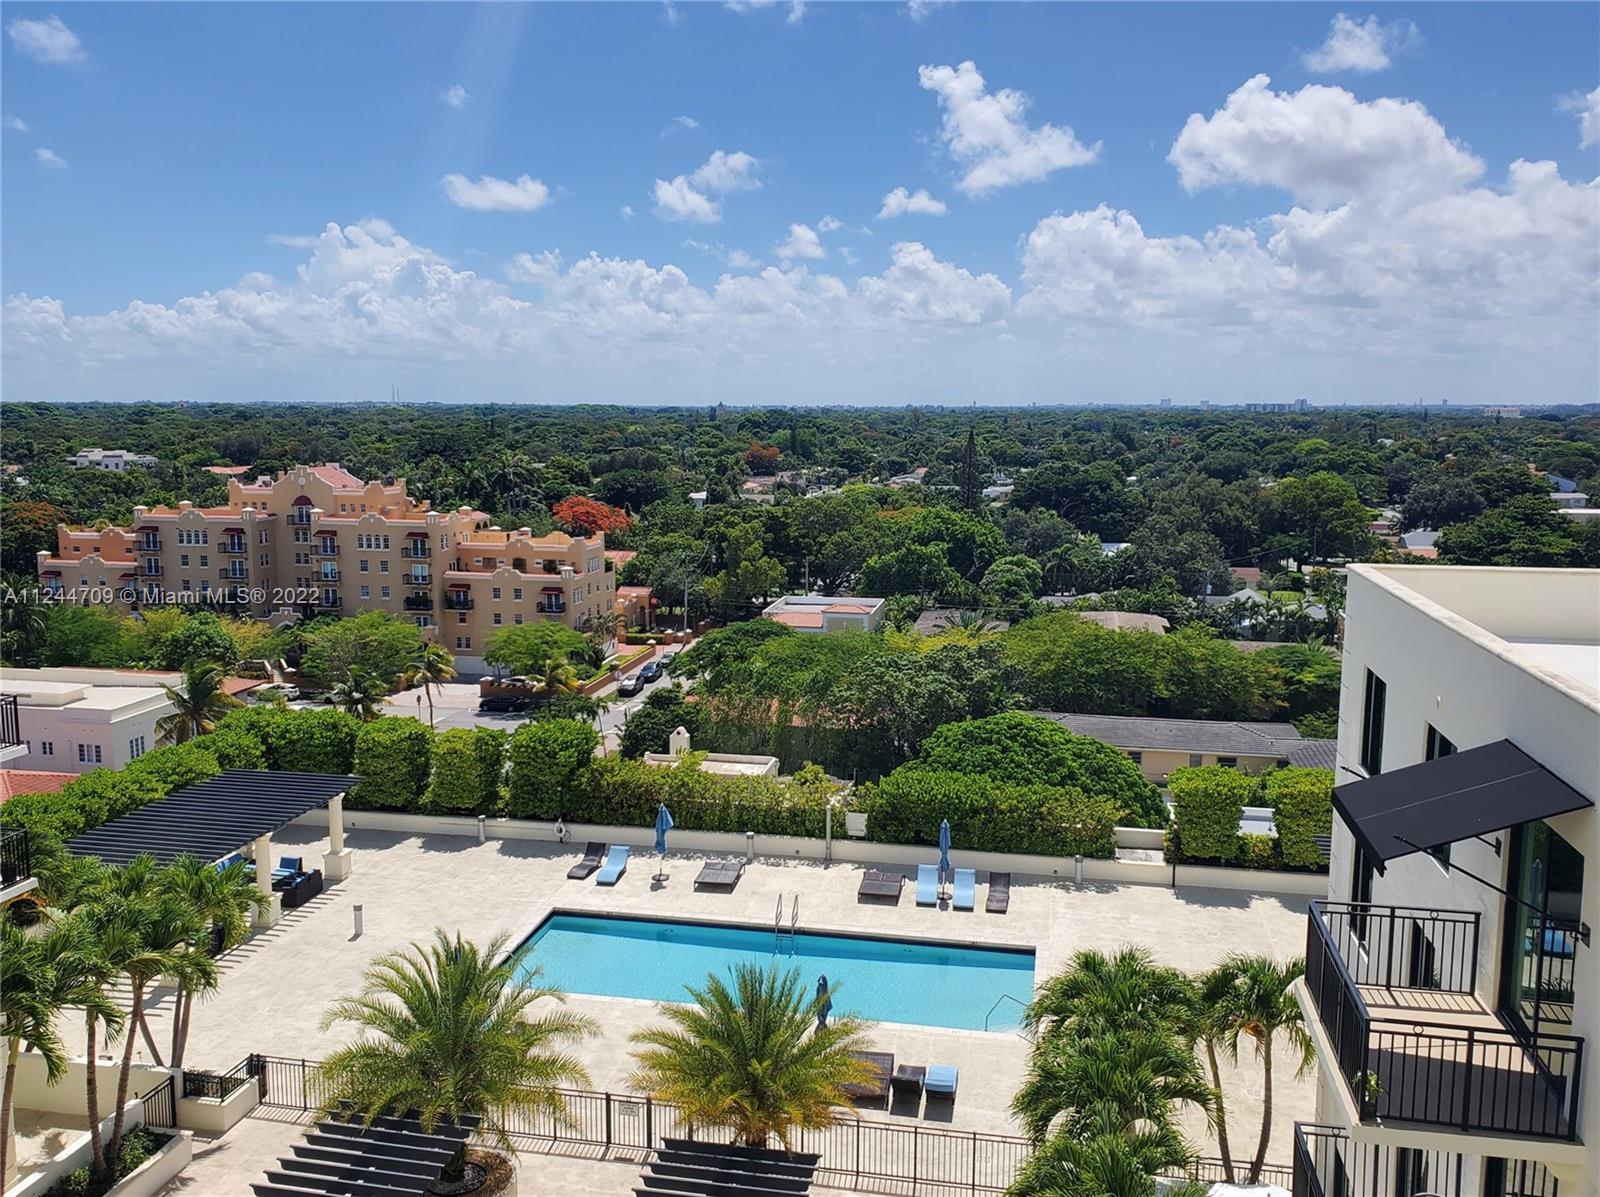 Beautiful furnished Condo in the heart of Coral Gables conveniently located minutes away from Miracle Mile restaurants, shops and businesses, Urban Life At Its Best. Spacious unit offers 2 bedrooms and 2 baths, 2 parking spaces side by side and beautiful views. Amenities include Concierge, great room, fitness center, beautiful pool and lounge area. Unit furnished by TUI Lifestyle. Deposits, first, last, security and building common area deposit. Unit available immediately.